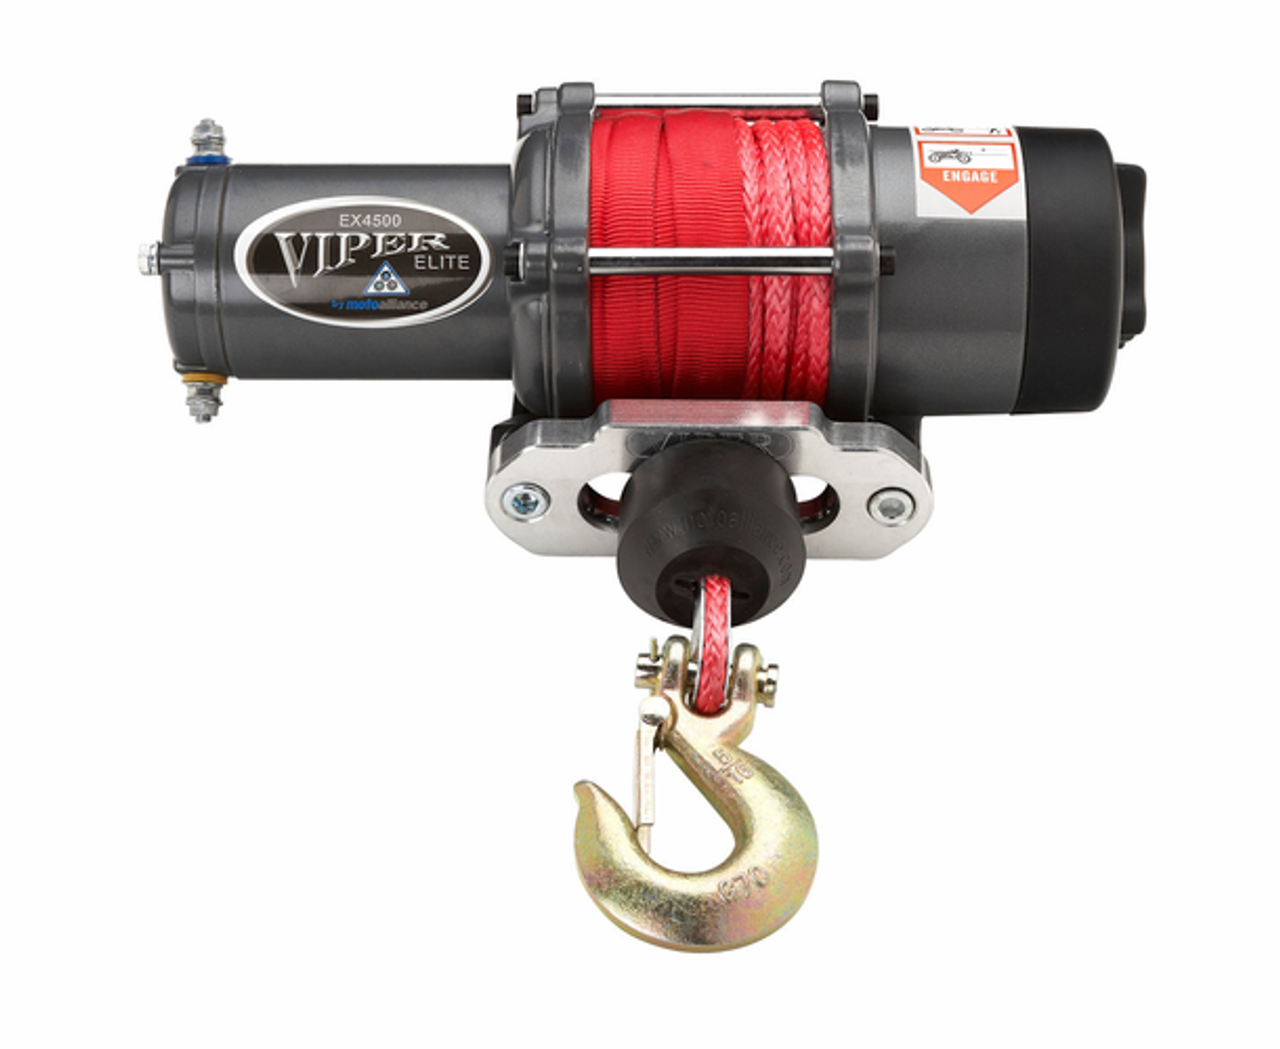 Viper Elite Synthetic Cable Winch